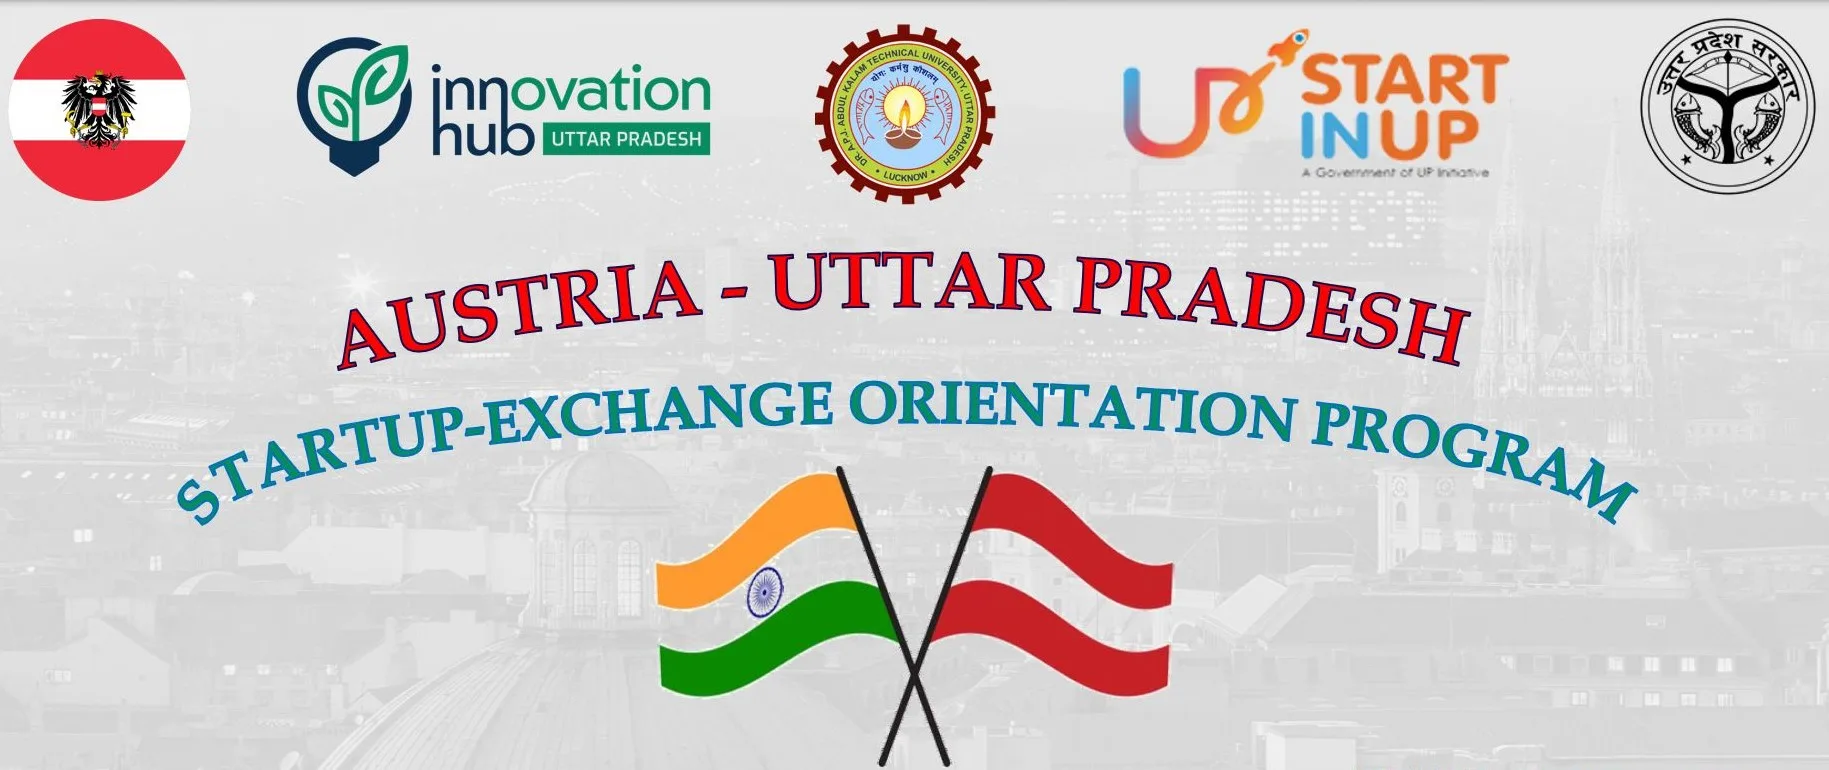 Austria-Uttar Pradesh Startup Exchange Program: A Month-Long Exploration in Austria Paves the Way for UP Startups to go Global